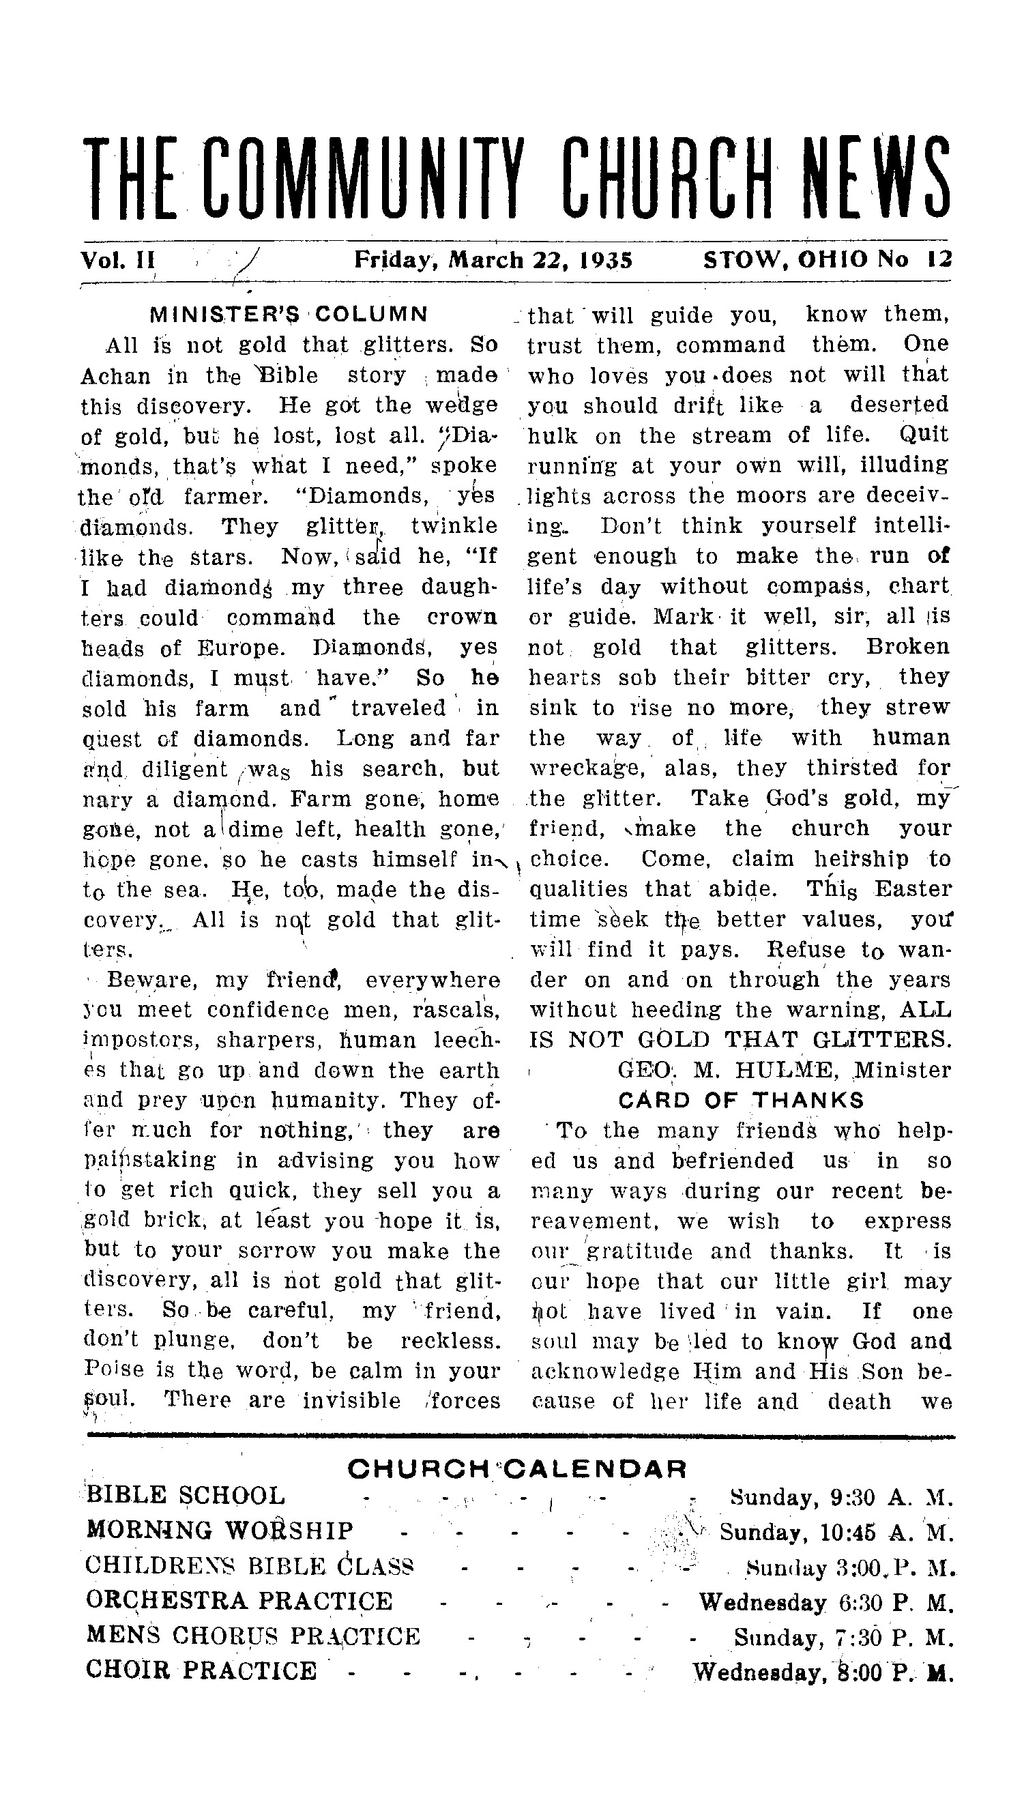 Vol. II Friday, March 22, 1935 STOW, OHIO No 12 MINISTER'S COLUMN All is not gold that glitters. So Achan in the "Bible story ; made this discovery. He got the wedge of gold, but he lost, lost all.